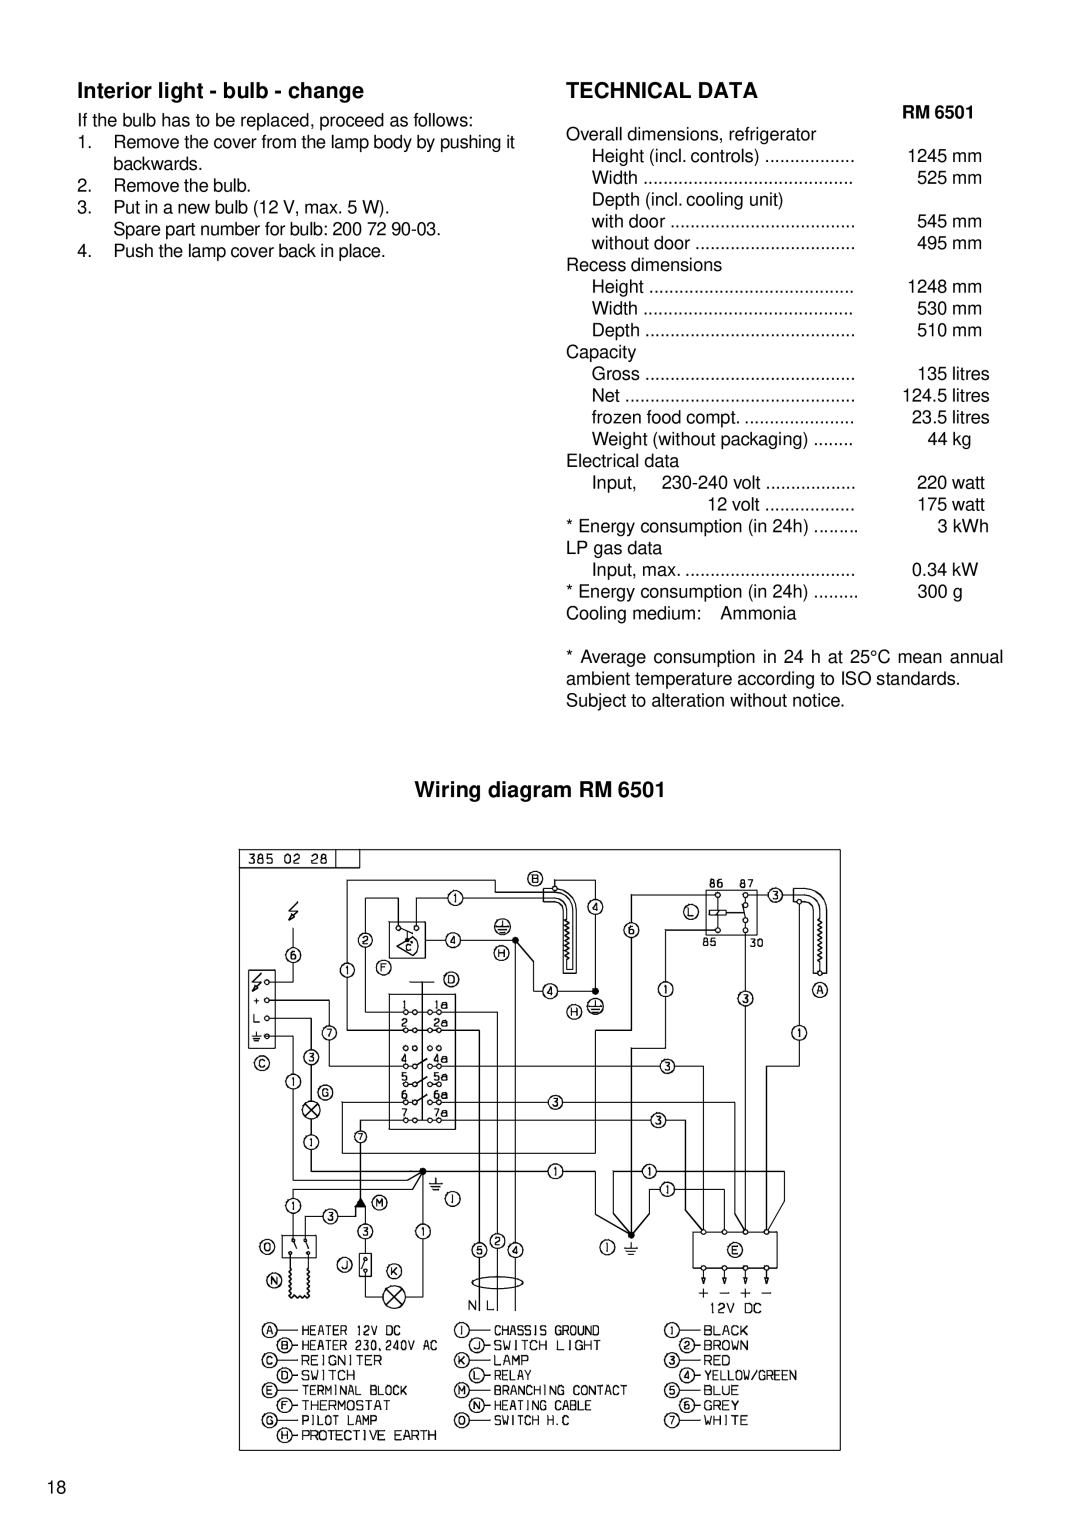 Electrolux RM 6501 manual Interior light - bulb - change, Technical Data, Wiring diagram RM 